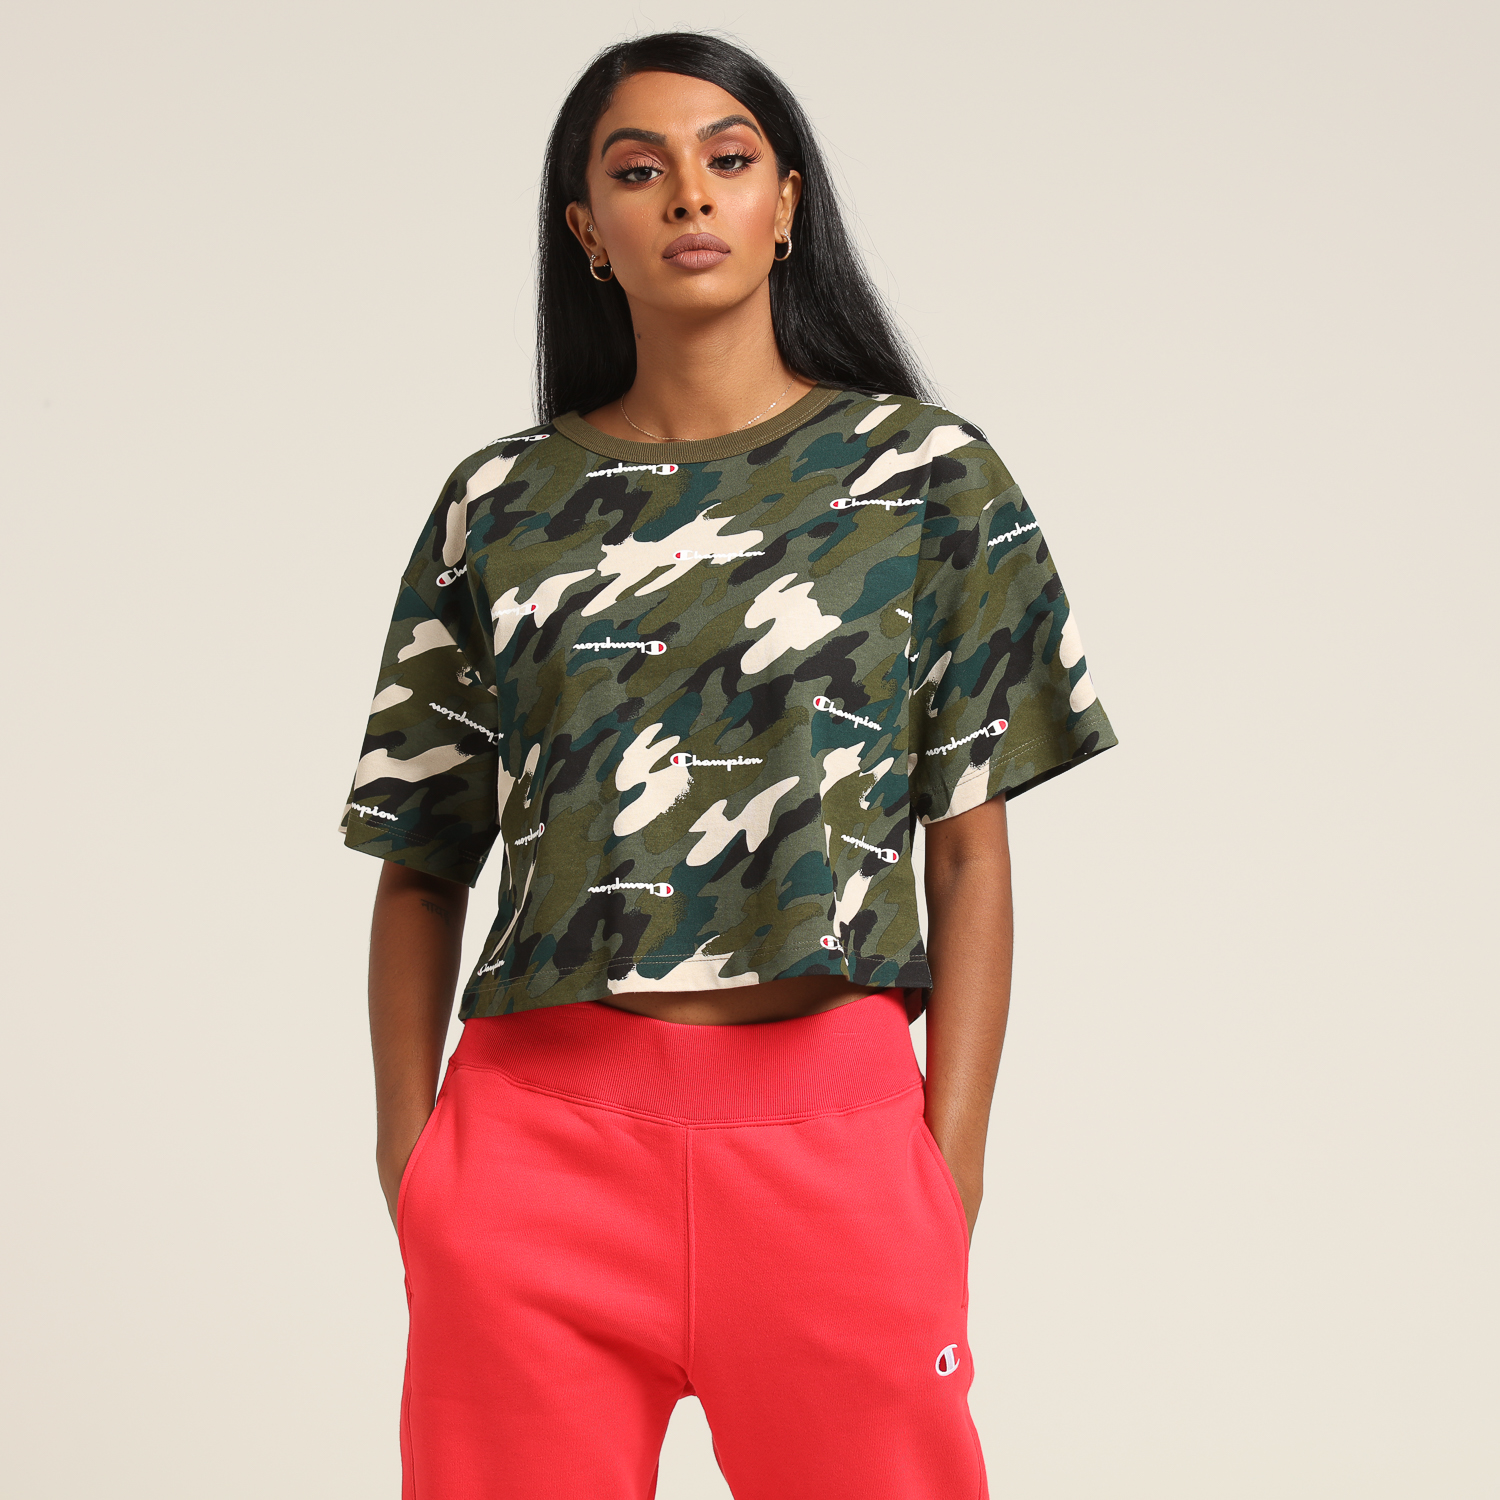 Get Ready For World Exclusive Women's Champion Camo | Culture Kings